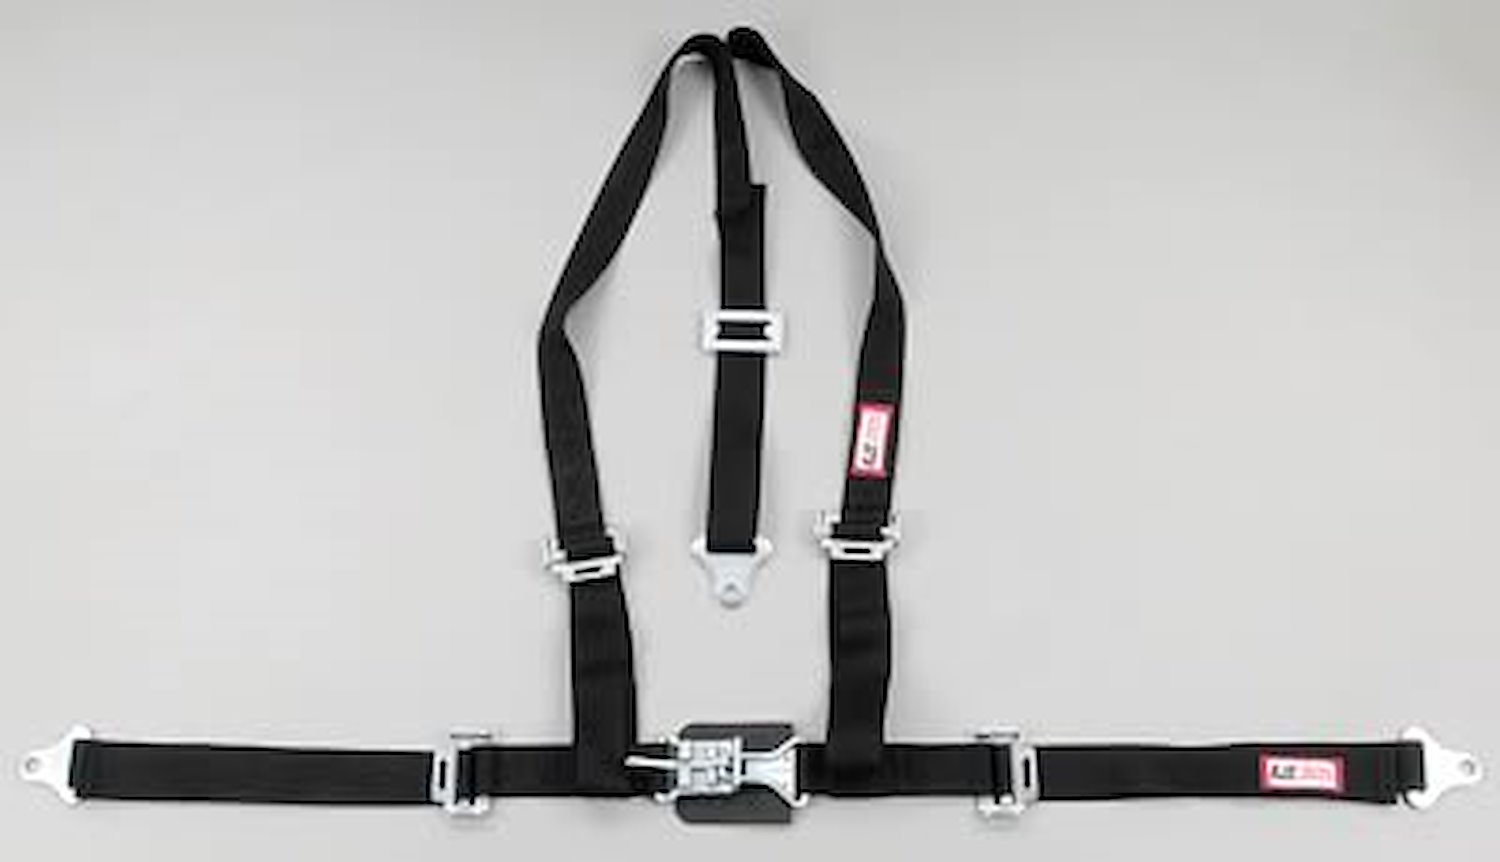 NON-SFI L&L HARNESS 3 PULL DOWN Lap Belt SNAP SEWN IN 2 S.H. Individual FLOOR Mount WRAP/BOLT PURPLE